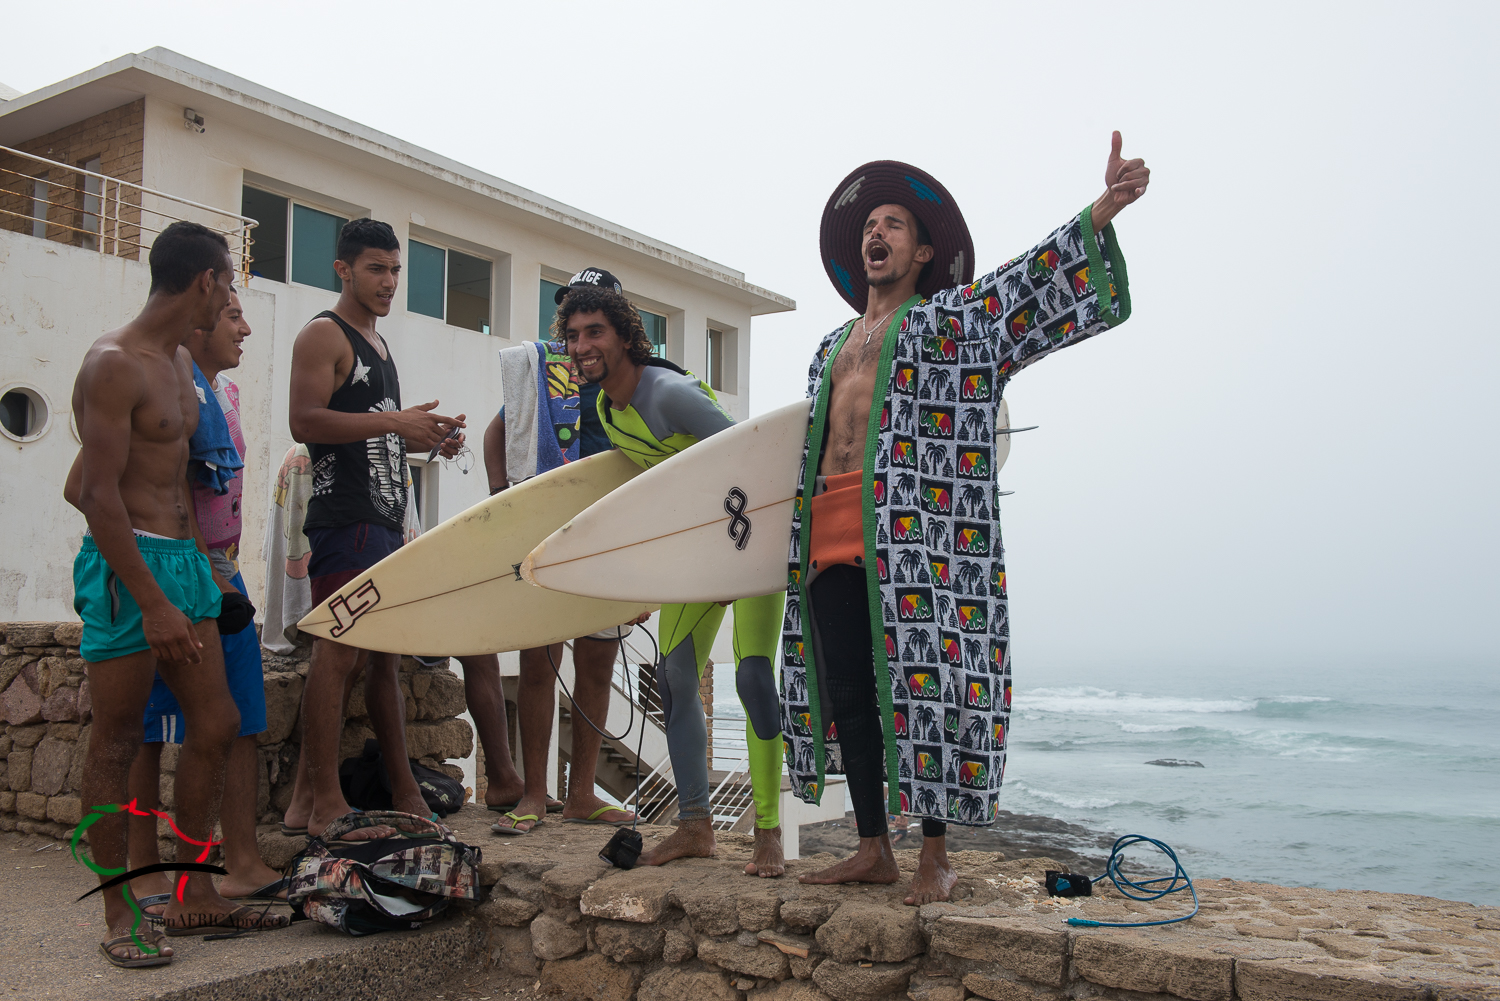 A group of portrait of surfers